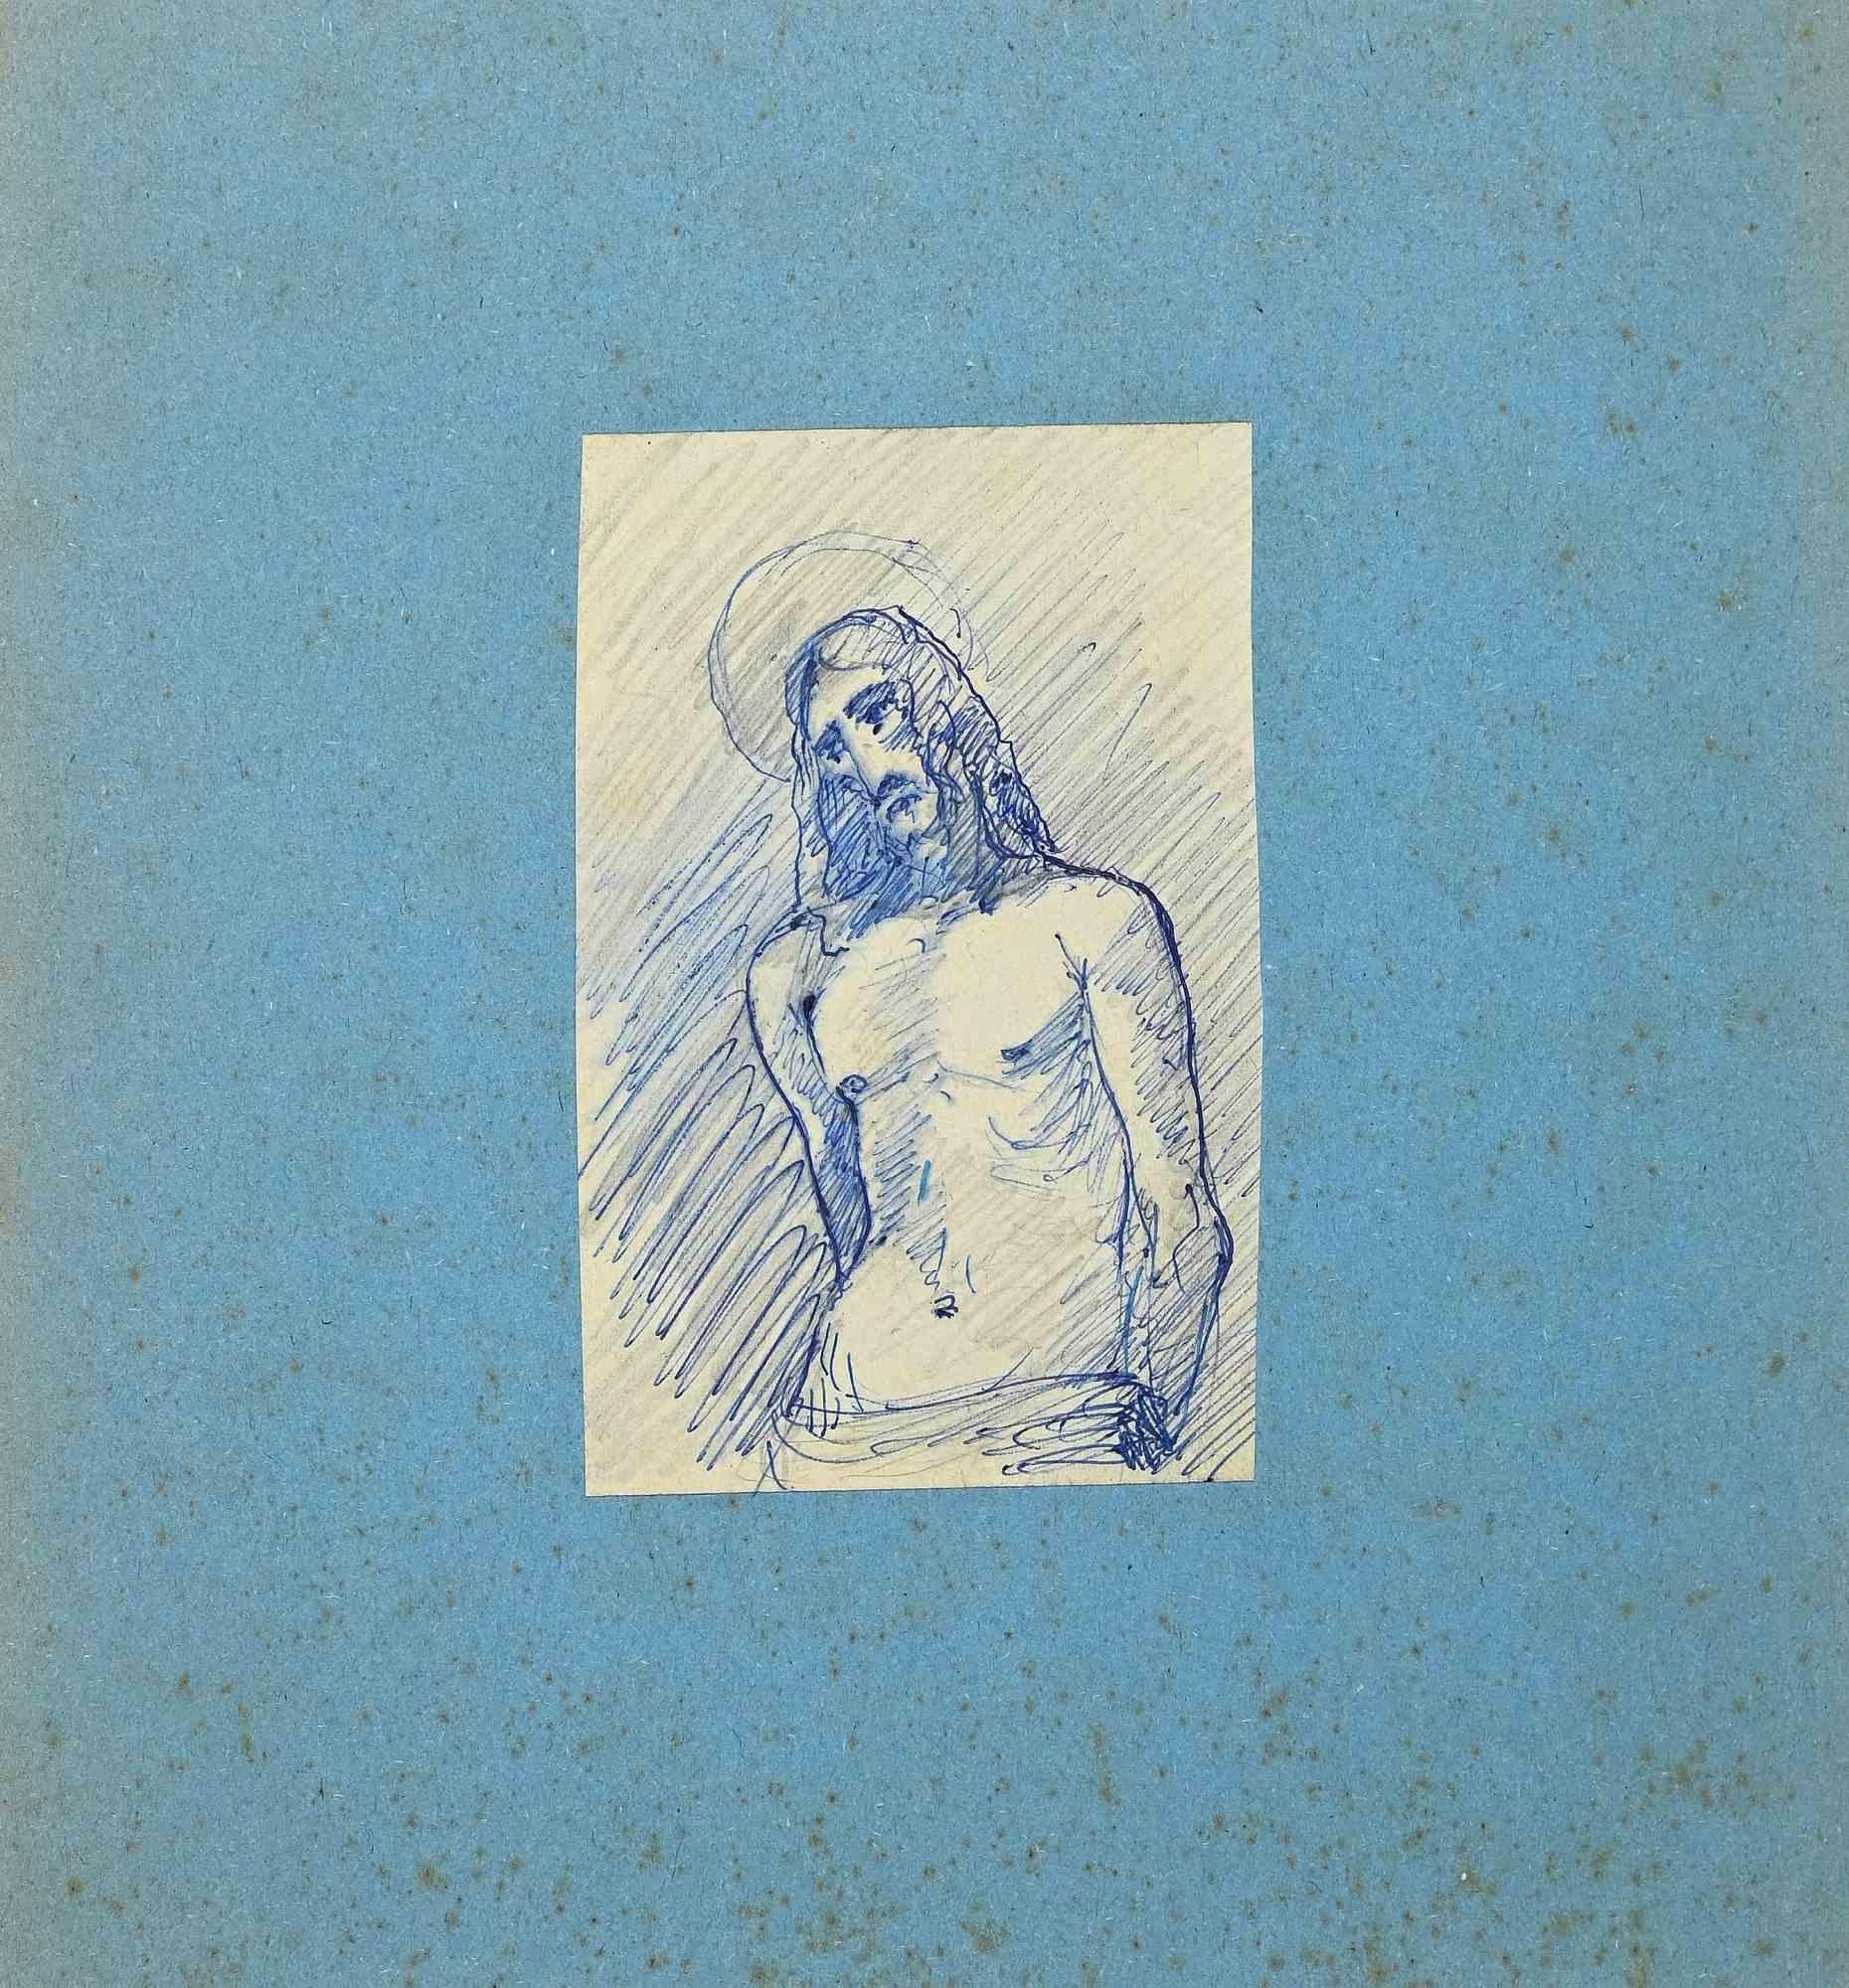 Unknown Figurative Print - Christ  - Original Pen and Pencil Drawing - Early 20th Century